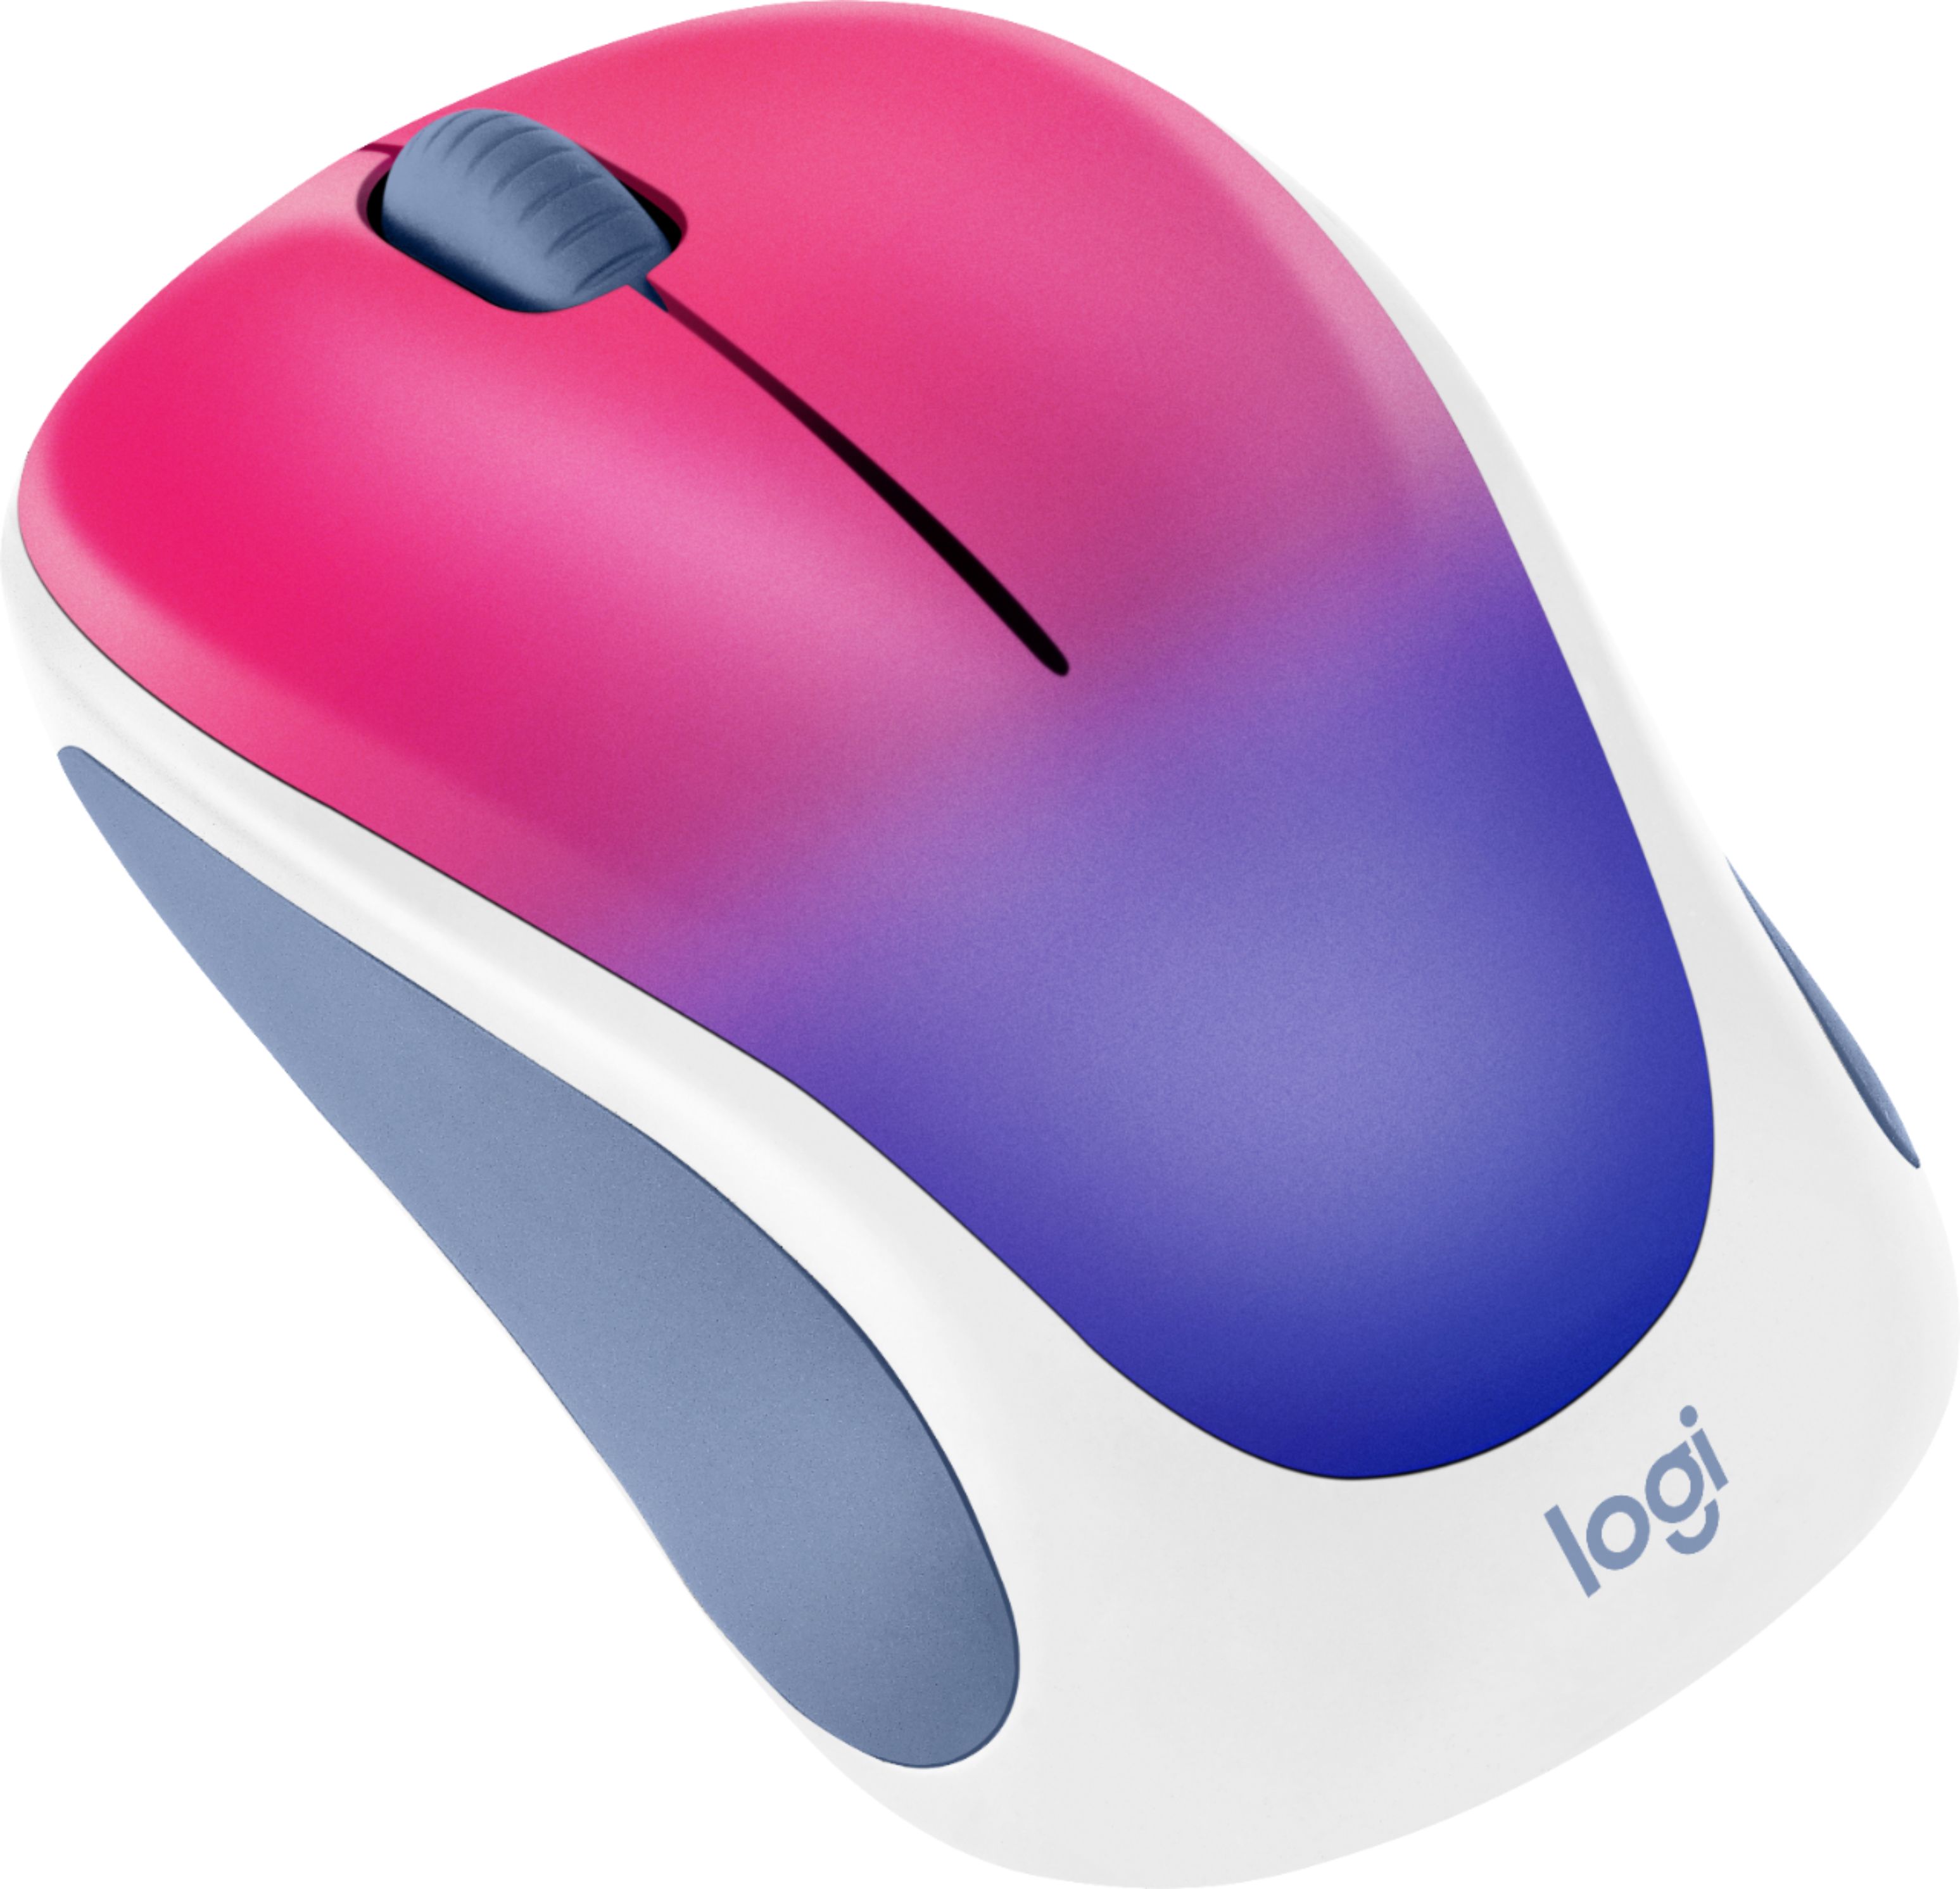 Logitech - Design Collection Wireless Optical Mouse with Nano Receiver - Blue Blush